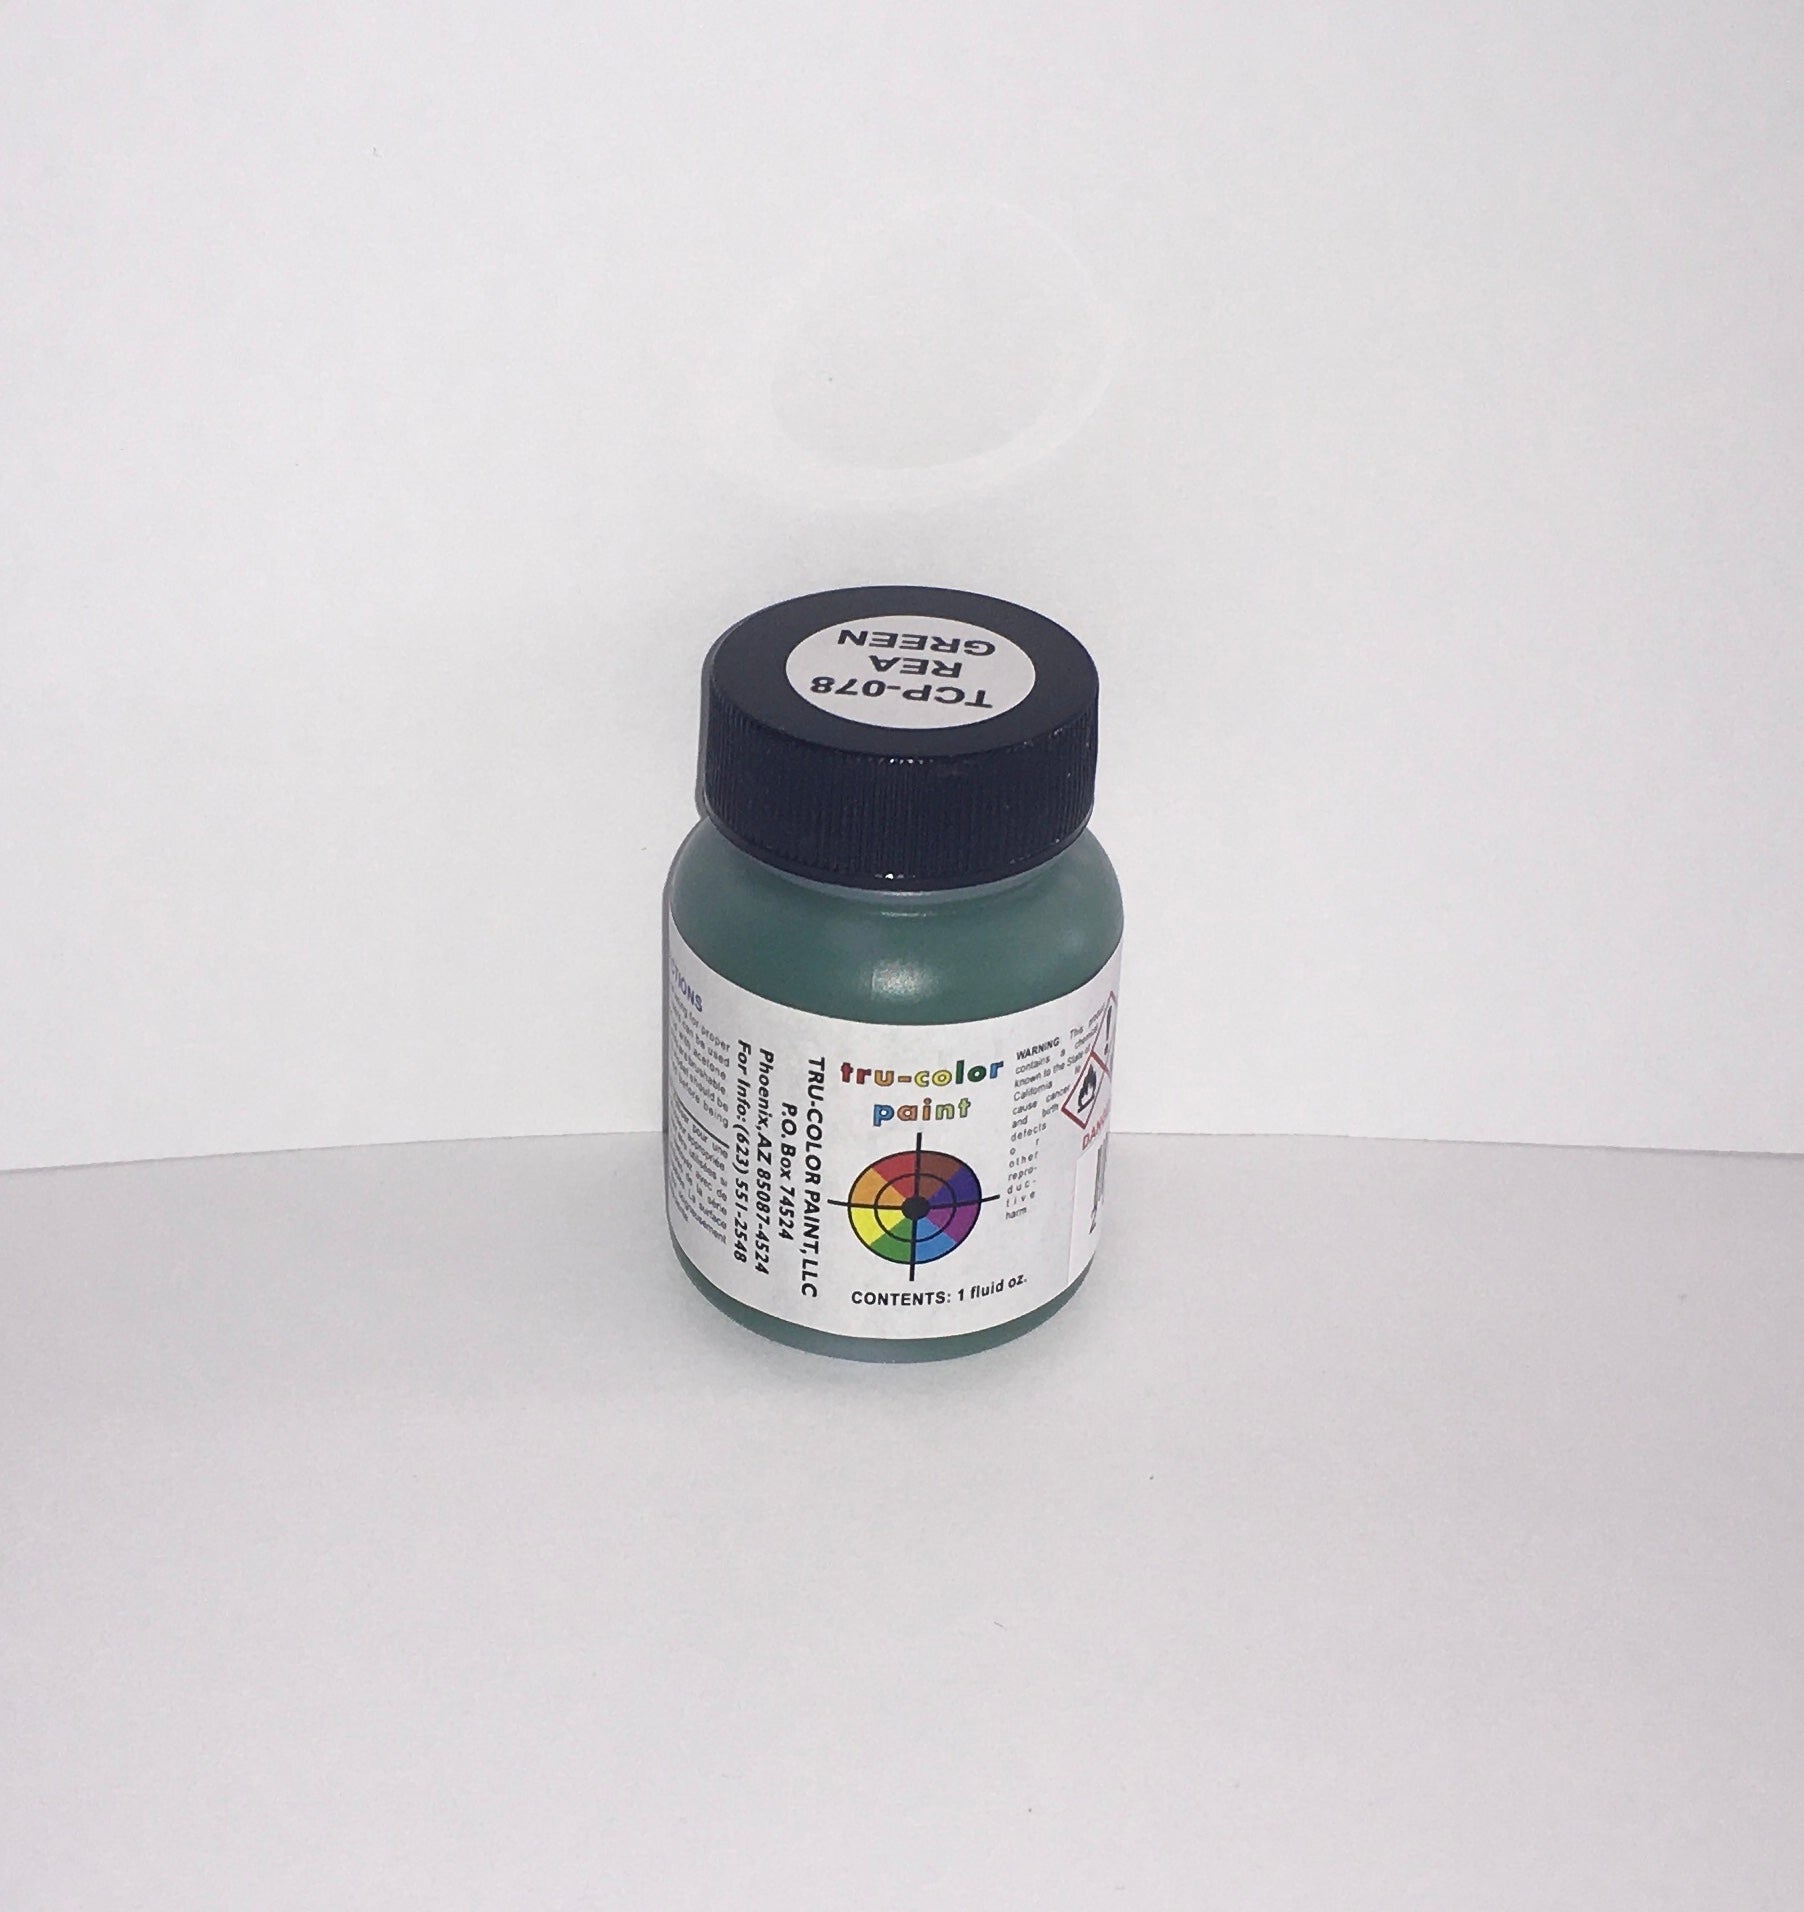 Tru-Color Paint - TCP-078 - Railway Express Agency - Green (Solvent-Based Paint)